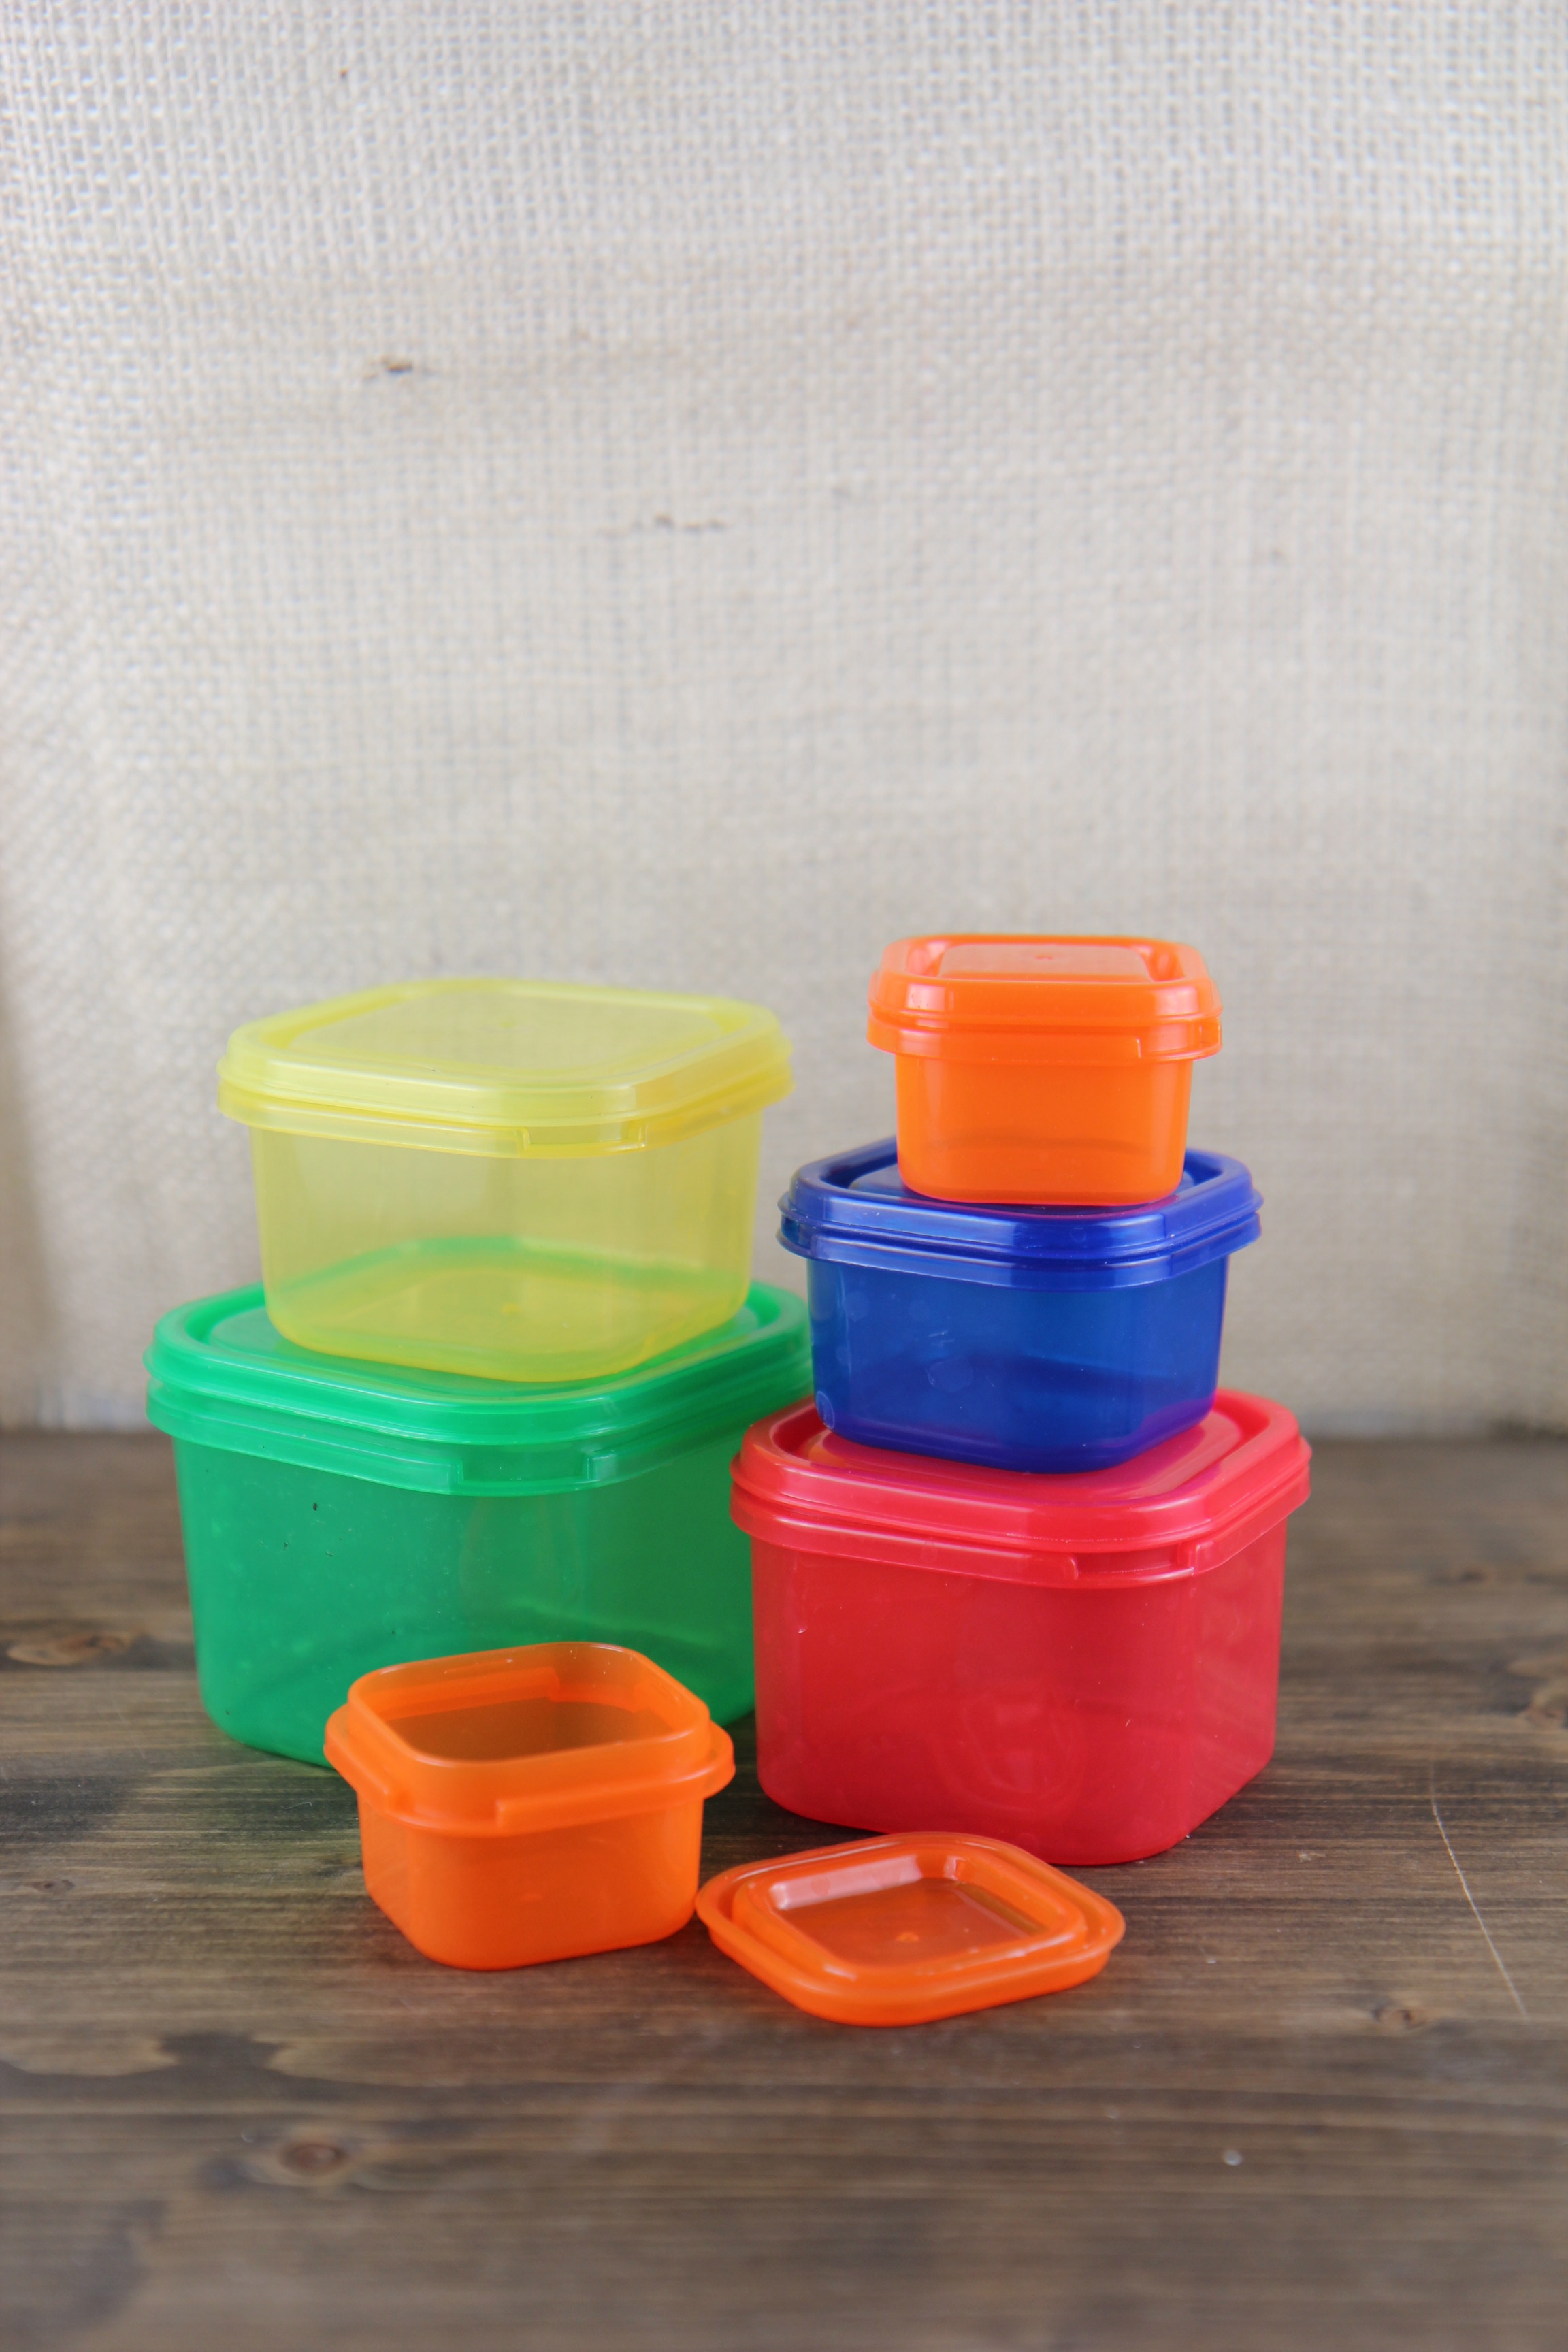 21-Day Fix Container Sizes - Beach Ready Now